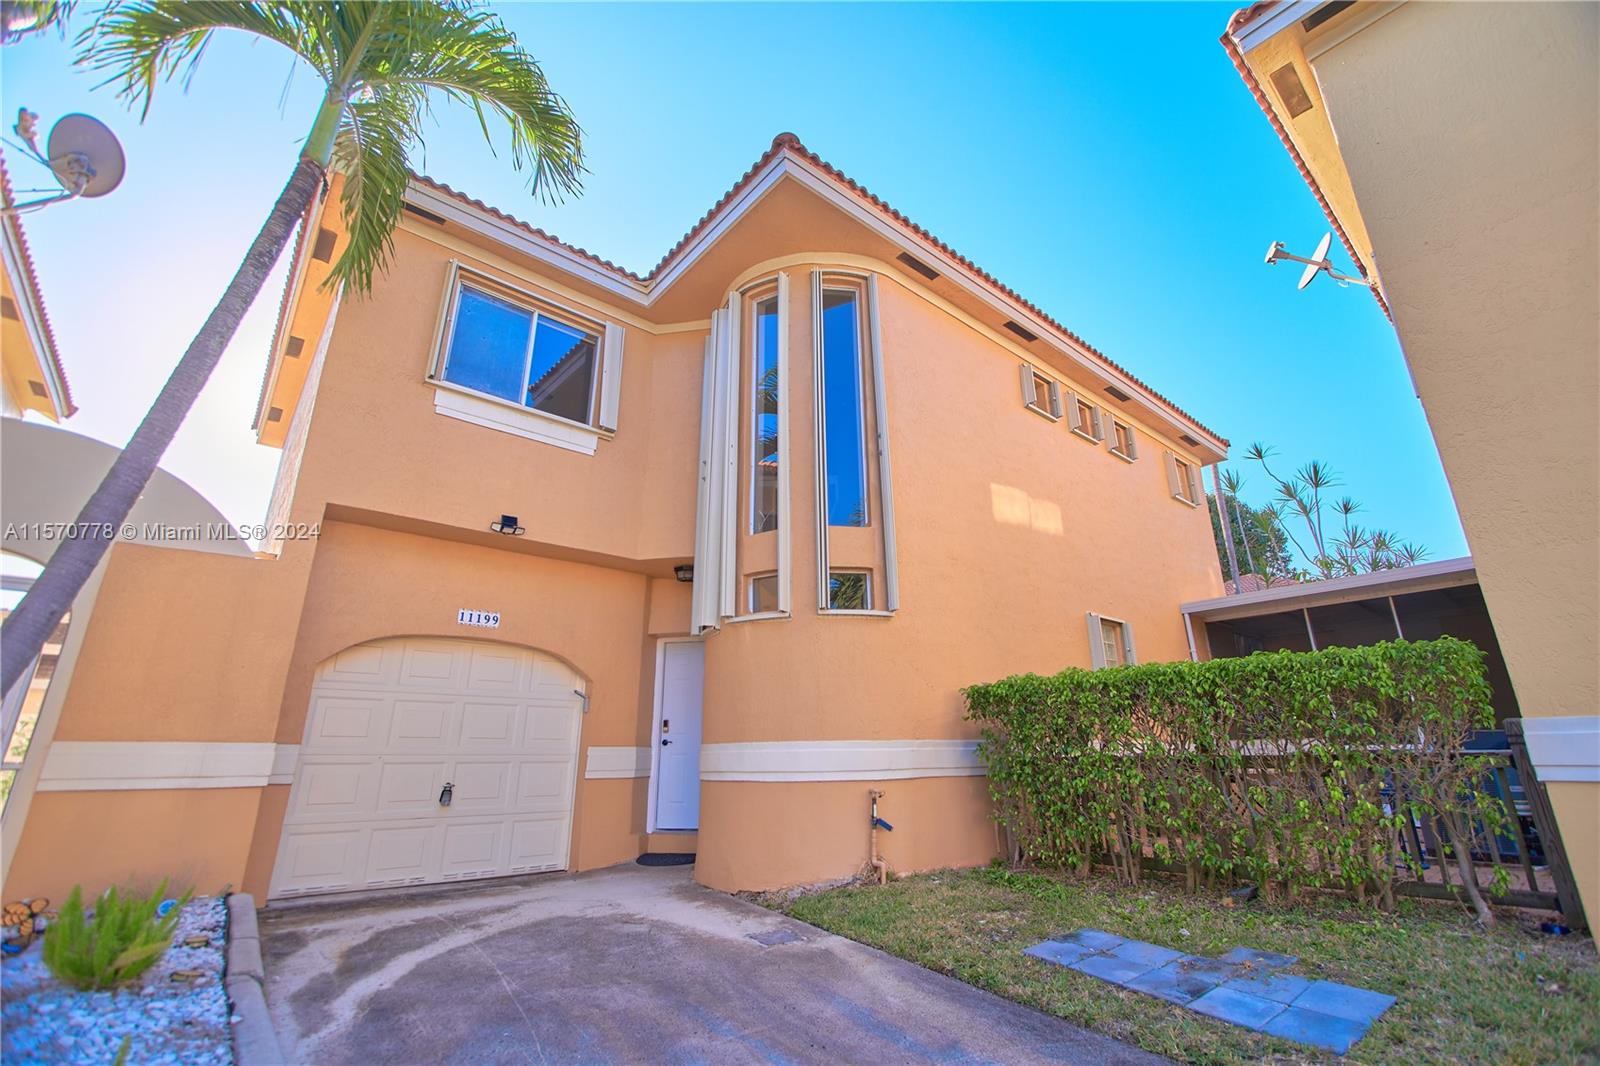 House for Sale in Coral Springs, FL